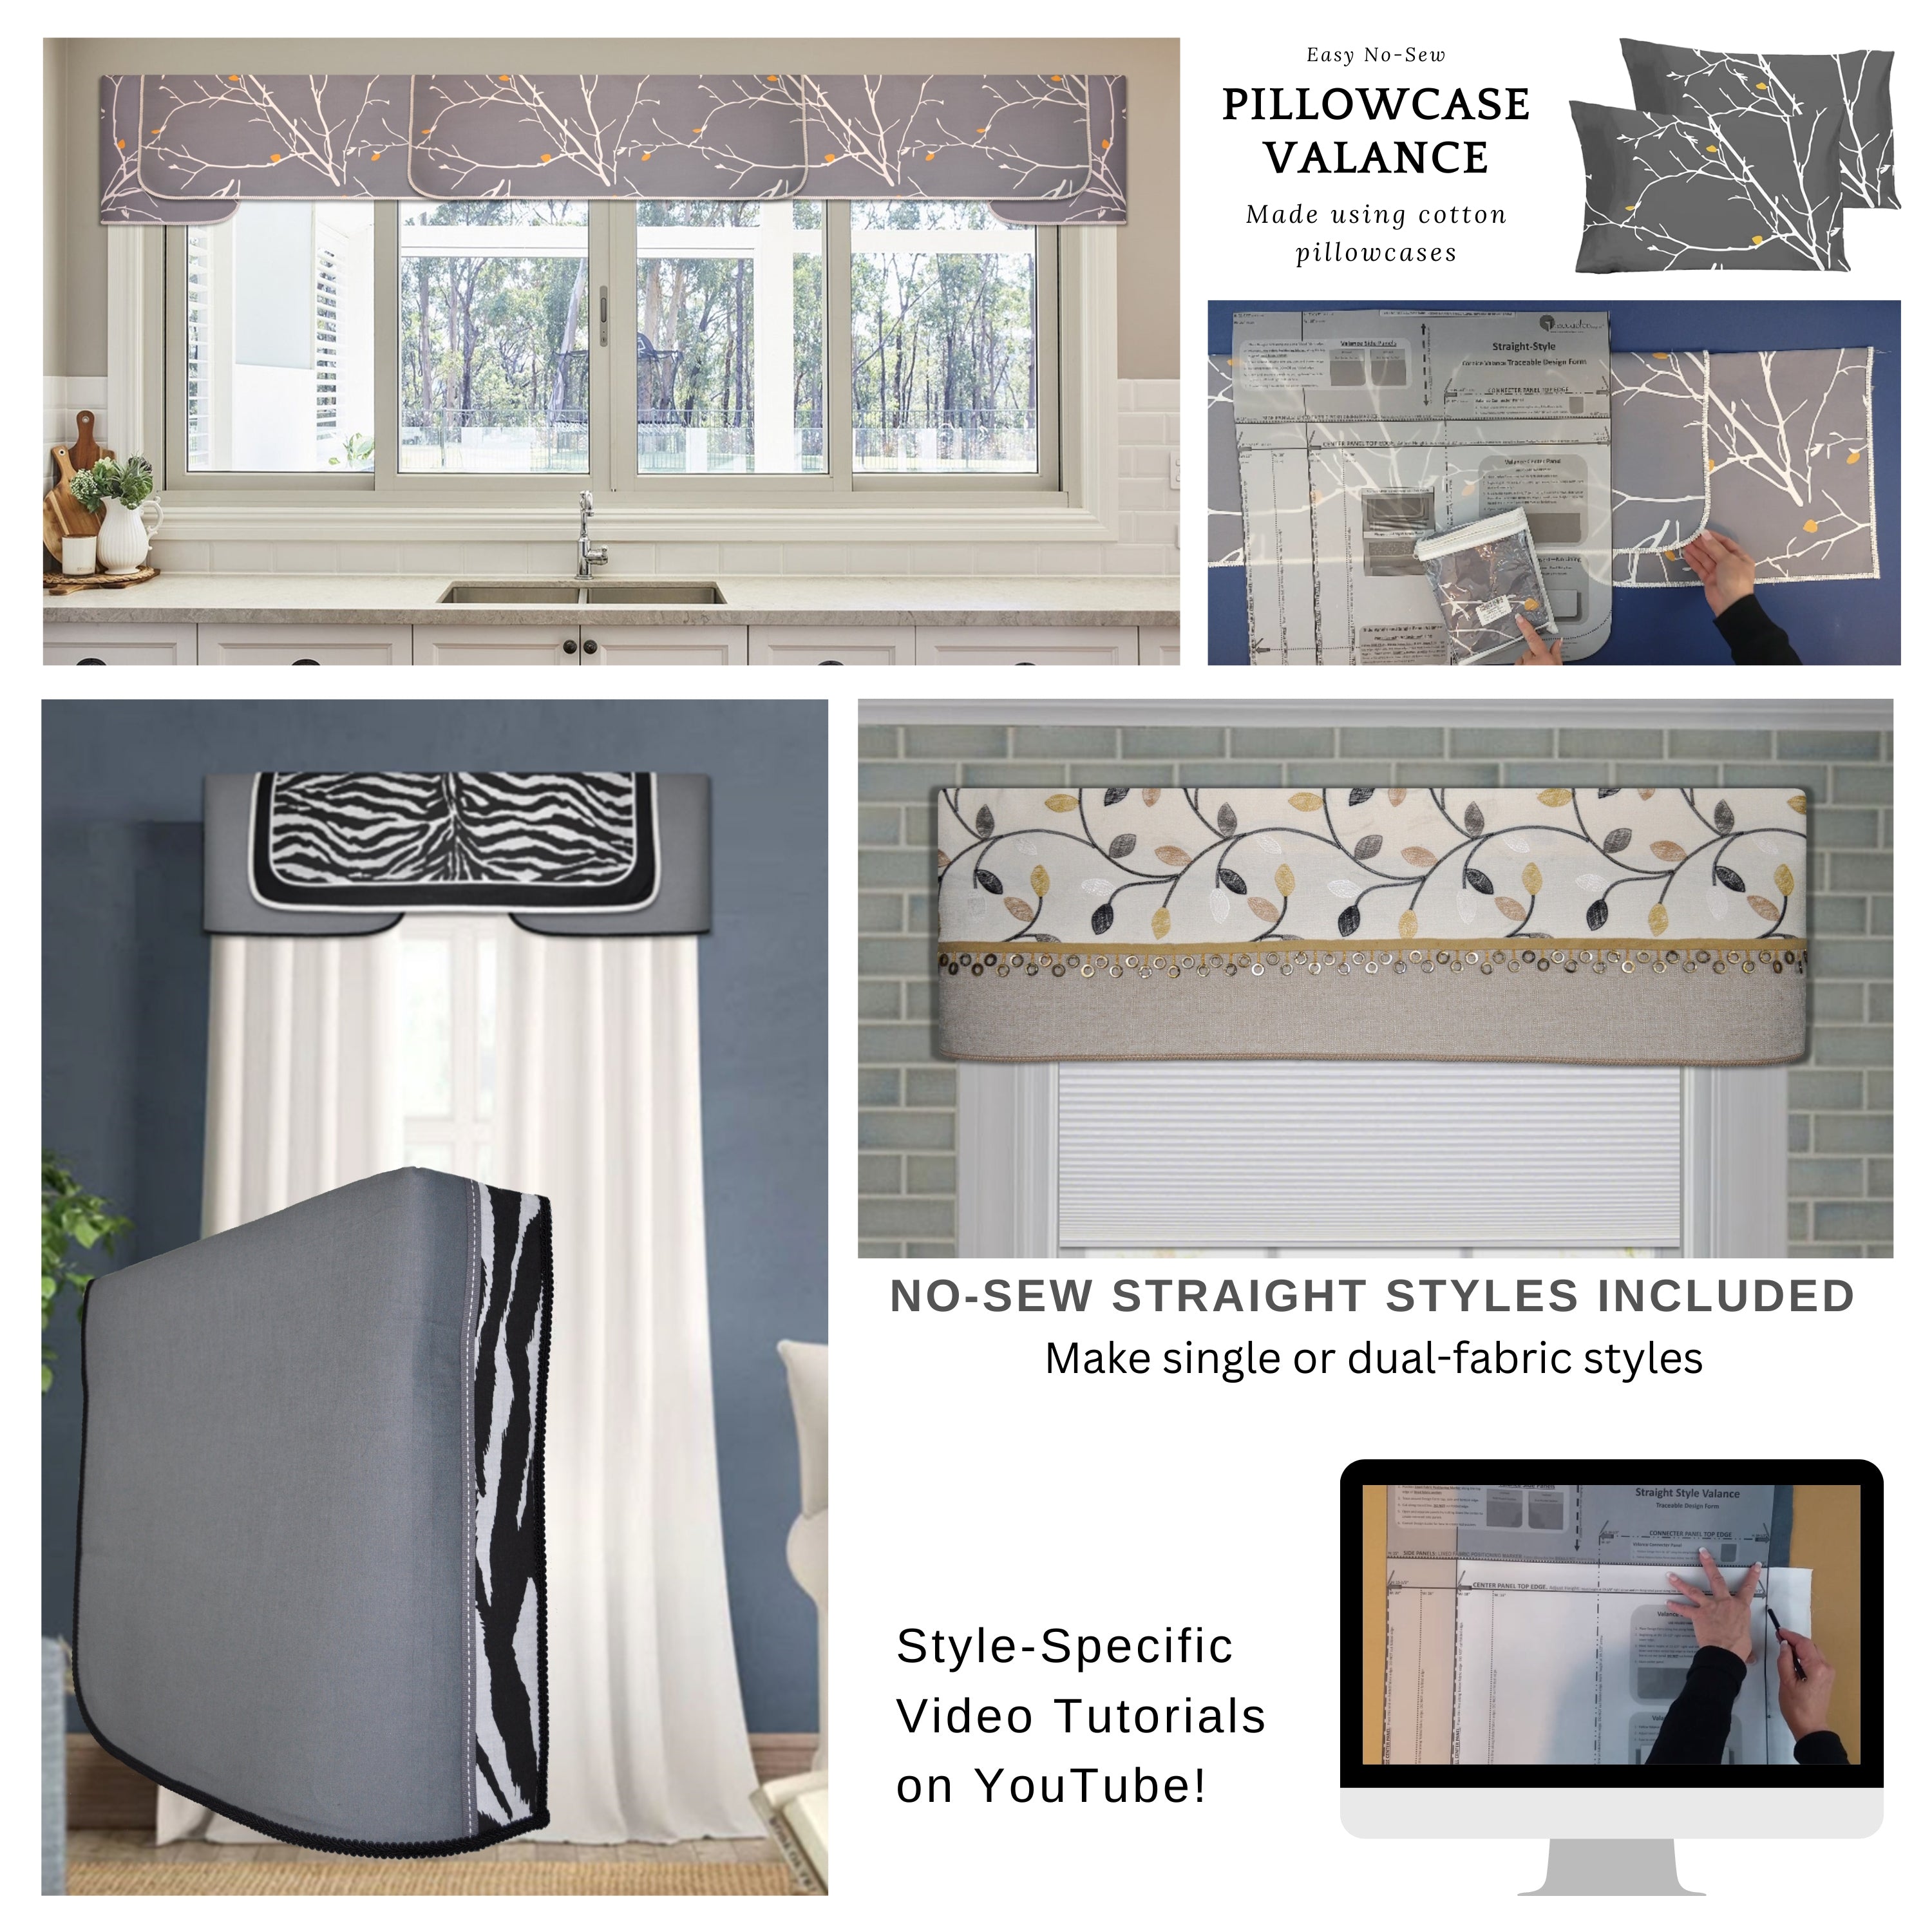 Traceable Designer no-sew DIY valance kit includes three styles in one kit. Fit all window sizes. Use valances to enhance drapes, shades or plain windows. Reusable kit for unlimited DIY home decorating. Designed by Linda Schurr